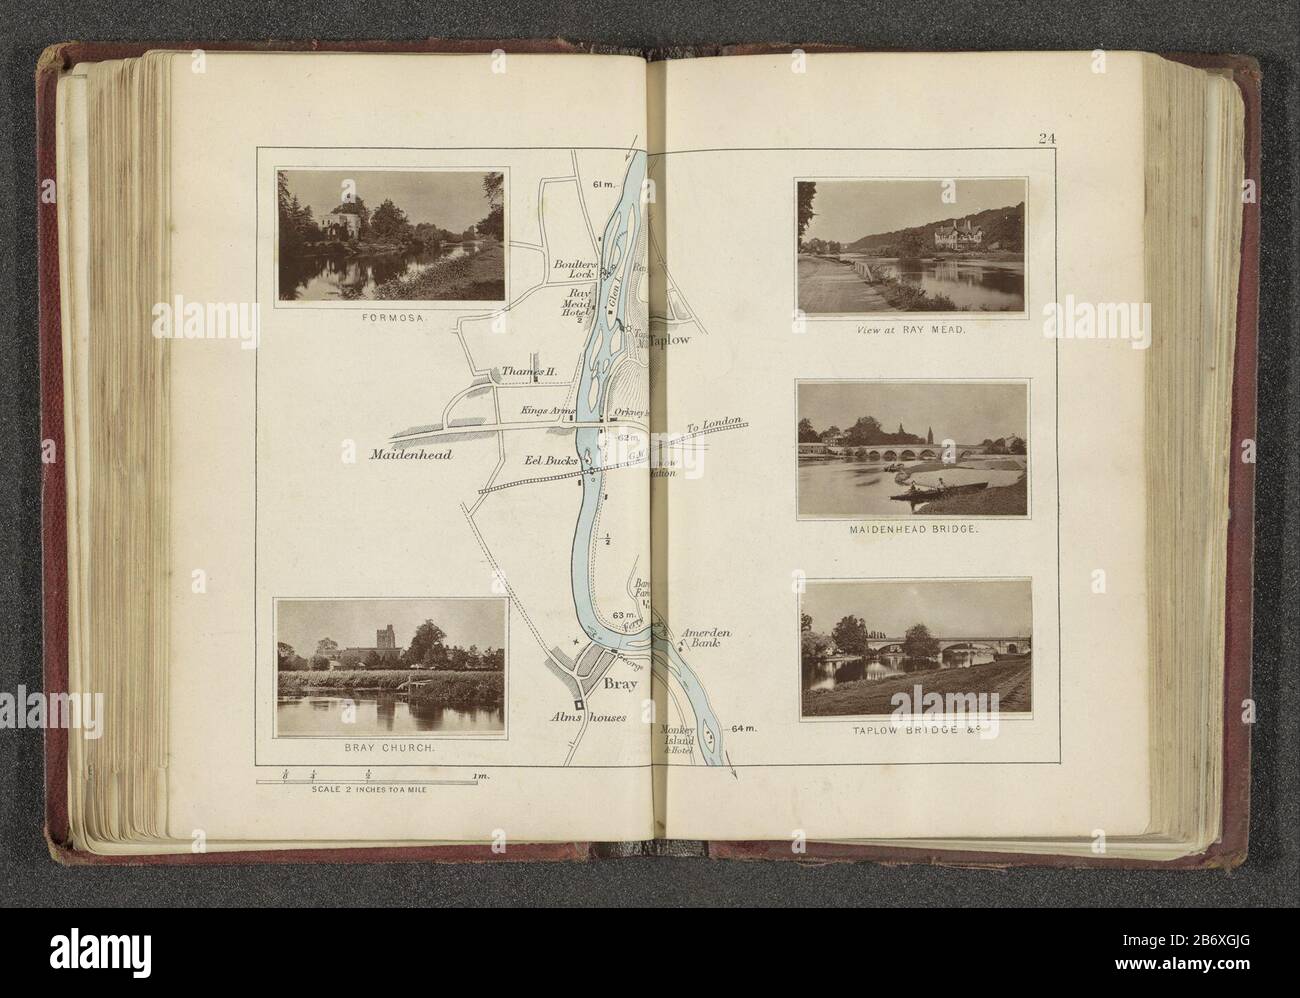 Kaart met vijf afbeeldingen van plaatsen langs de Theems Left: face on Formosa Island and a church, right face Ray Mead, a bridge at Maidenhead and a bridge at Taplow. Manufacturer  : photographer: Henry W. Tauntprentmaker: anonymous location manufacture: England Dated: in or after 1878 - in or in front 1879 Material: paper Technique: woodburytype / engra (printing process) Dimensions: page: h 182 mm × W 230 mm Explanation Prints as spread opposite page 49. Subject : river island bridge where: Formosa IslandTaplowMaidenhead Stock Photo